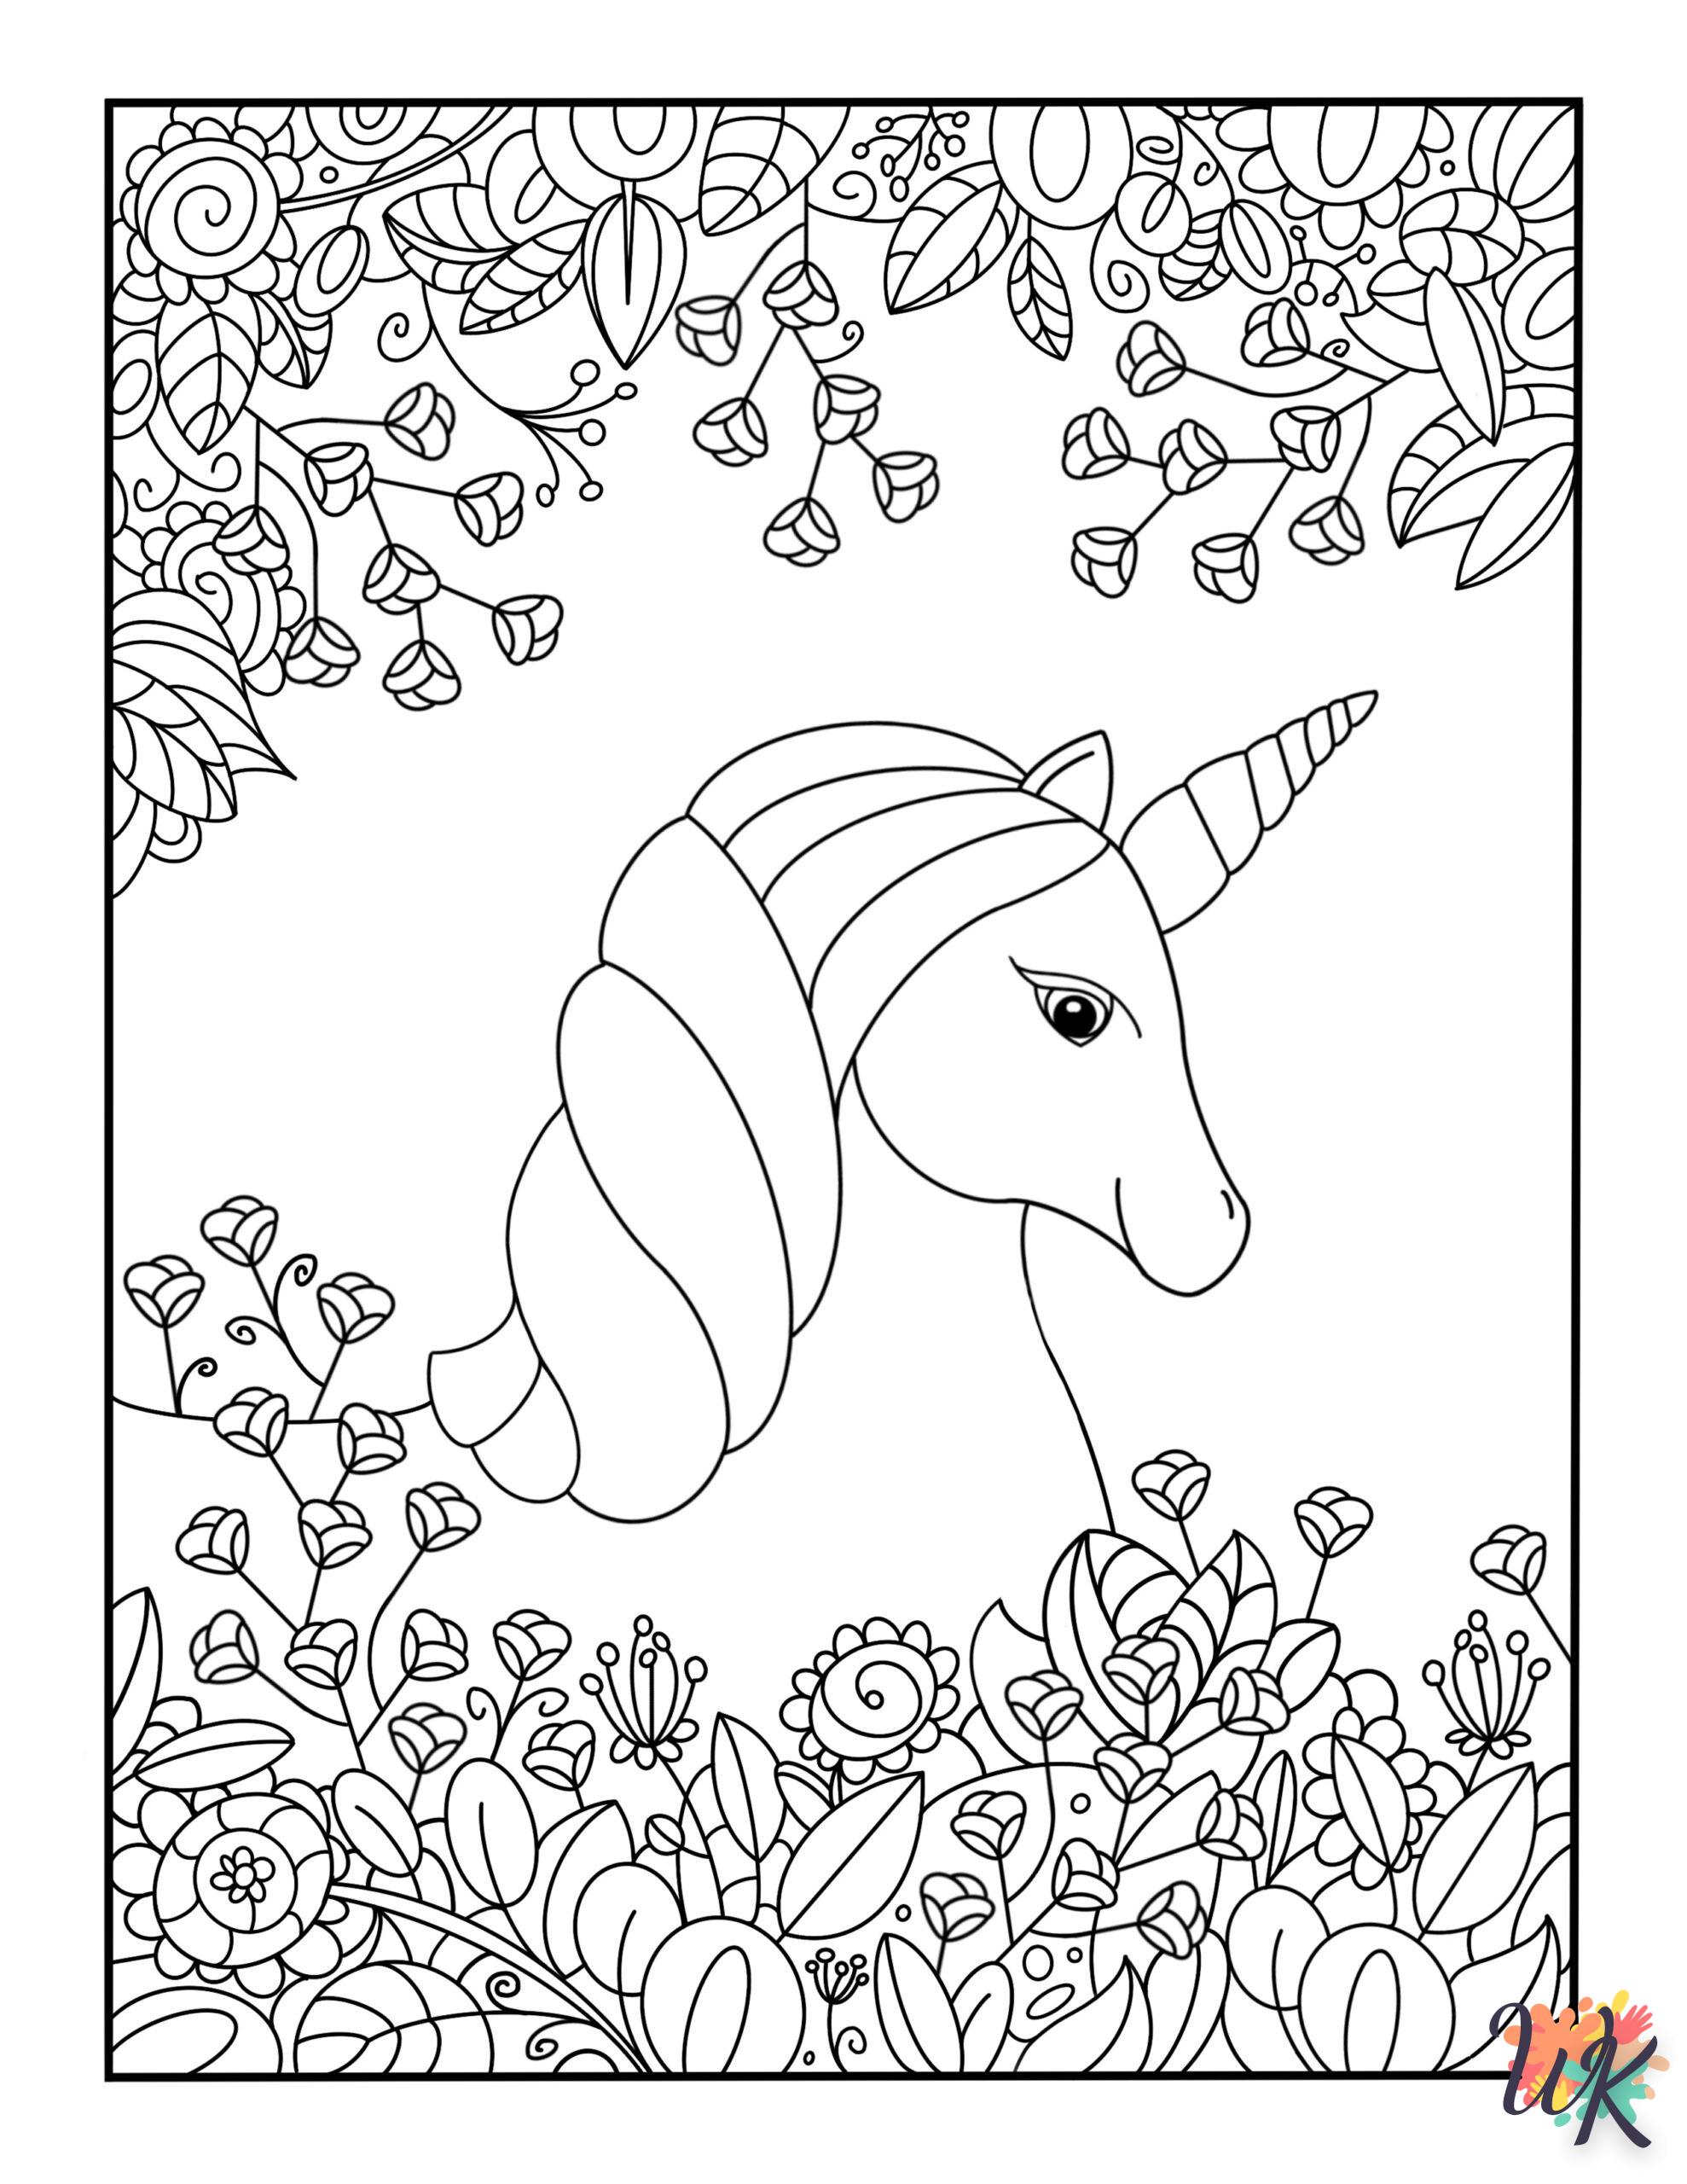 Unicorn ornaments coloring pages